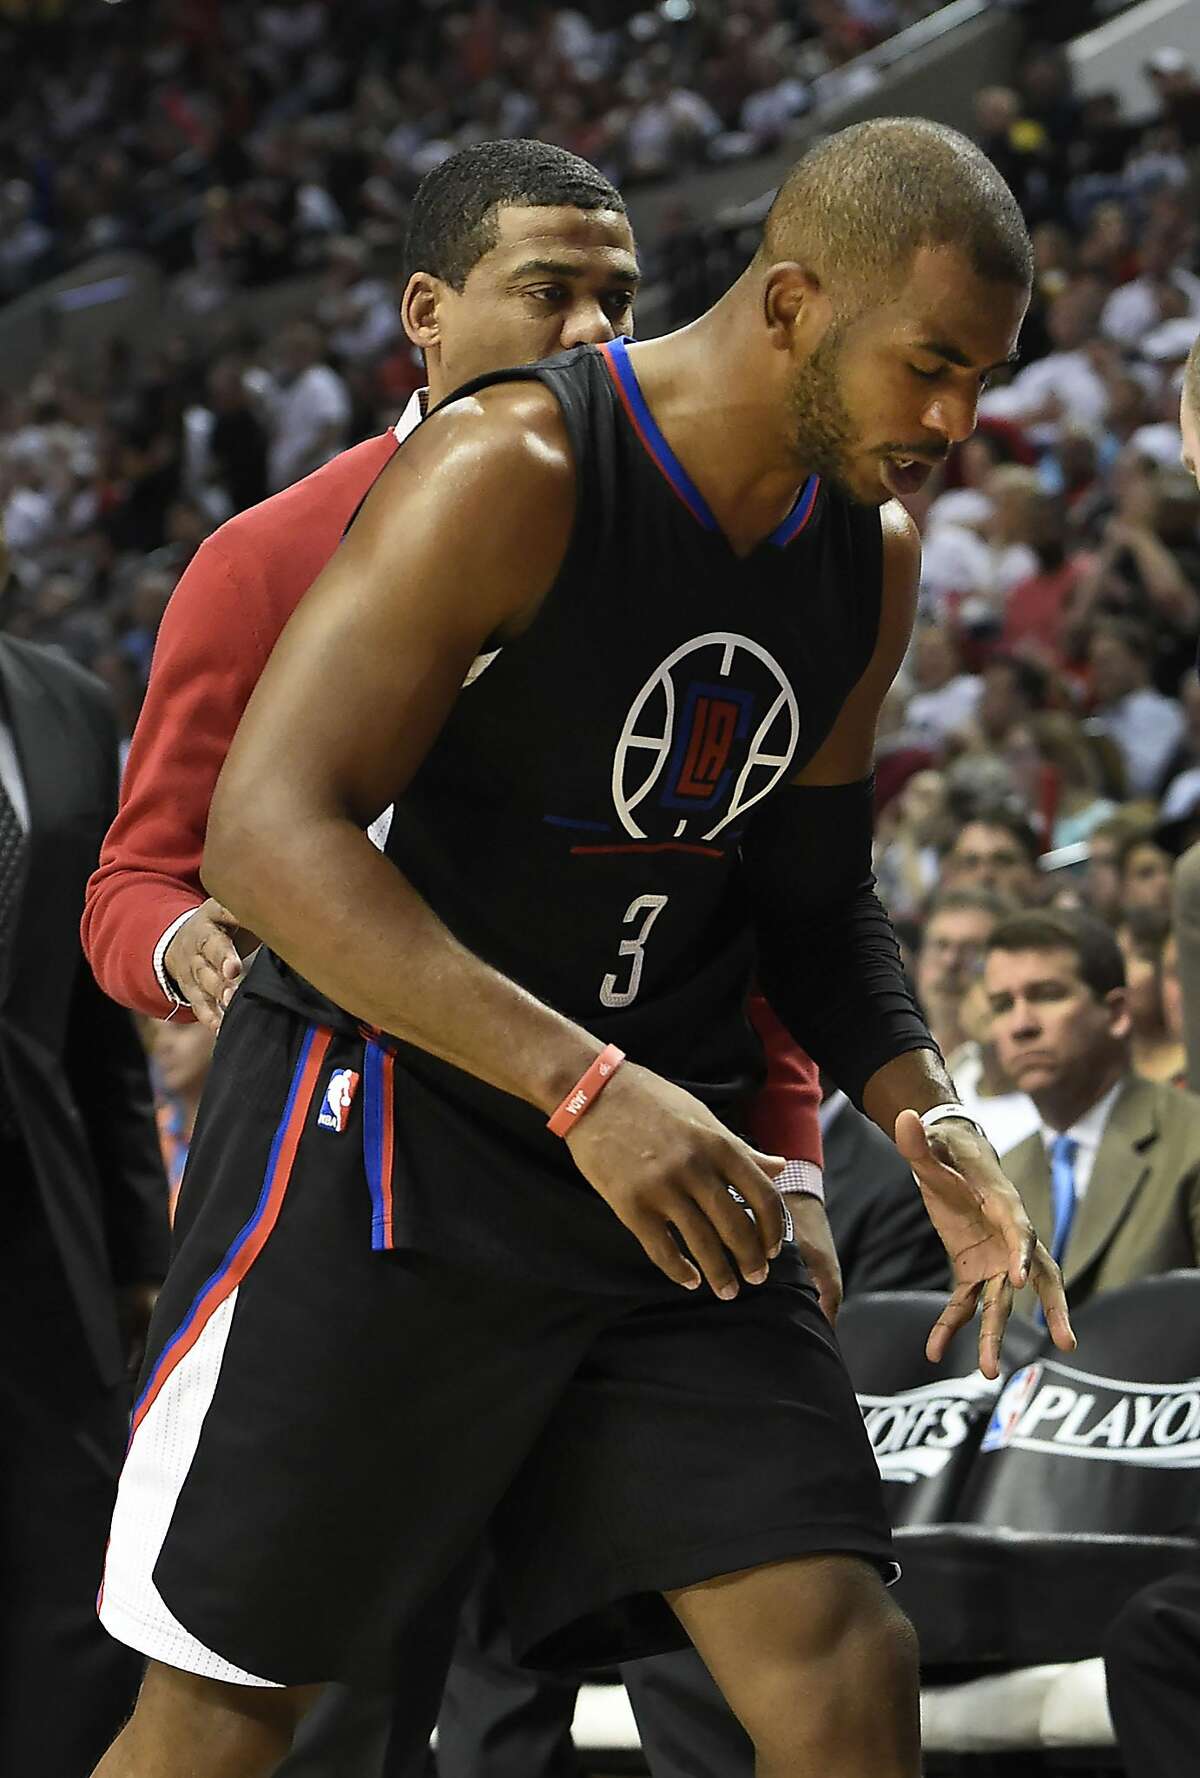 PORTLAND, OR - APRIL 25: Chris Paul #3 of the Los Angeles Clippers walks off the court after he injured his hand in the third quarter of Game Four of the Western Conference Quarterfinals against the Portland Trail Blazers during the 2016 NBA Playoffs at the Moda Center on April 25, 2016 in Portland, Oregon. The Blazers won the game 98-84. NOTE TO USER: User expressly acknowledges and agrees that by downloading and/or using this photograph, user is consenting to the terms and conditions of the Getty Images License Agreement. (Photo by Steve Dykes/Getty Images)